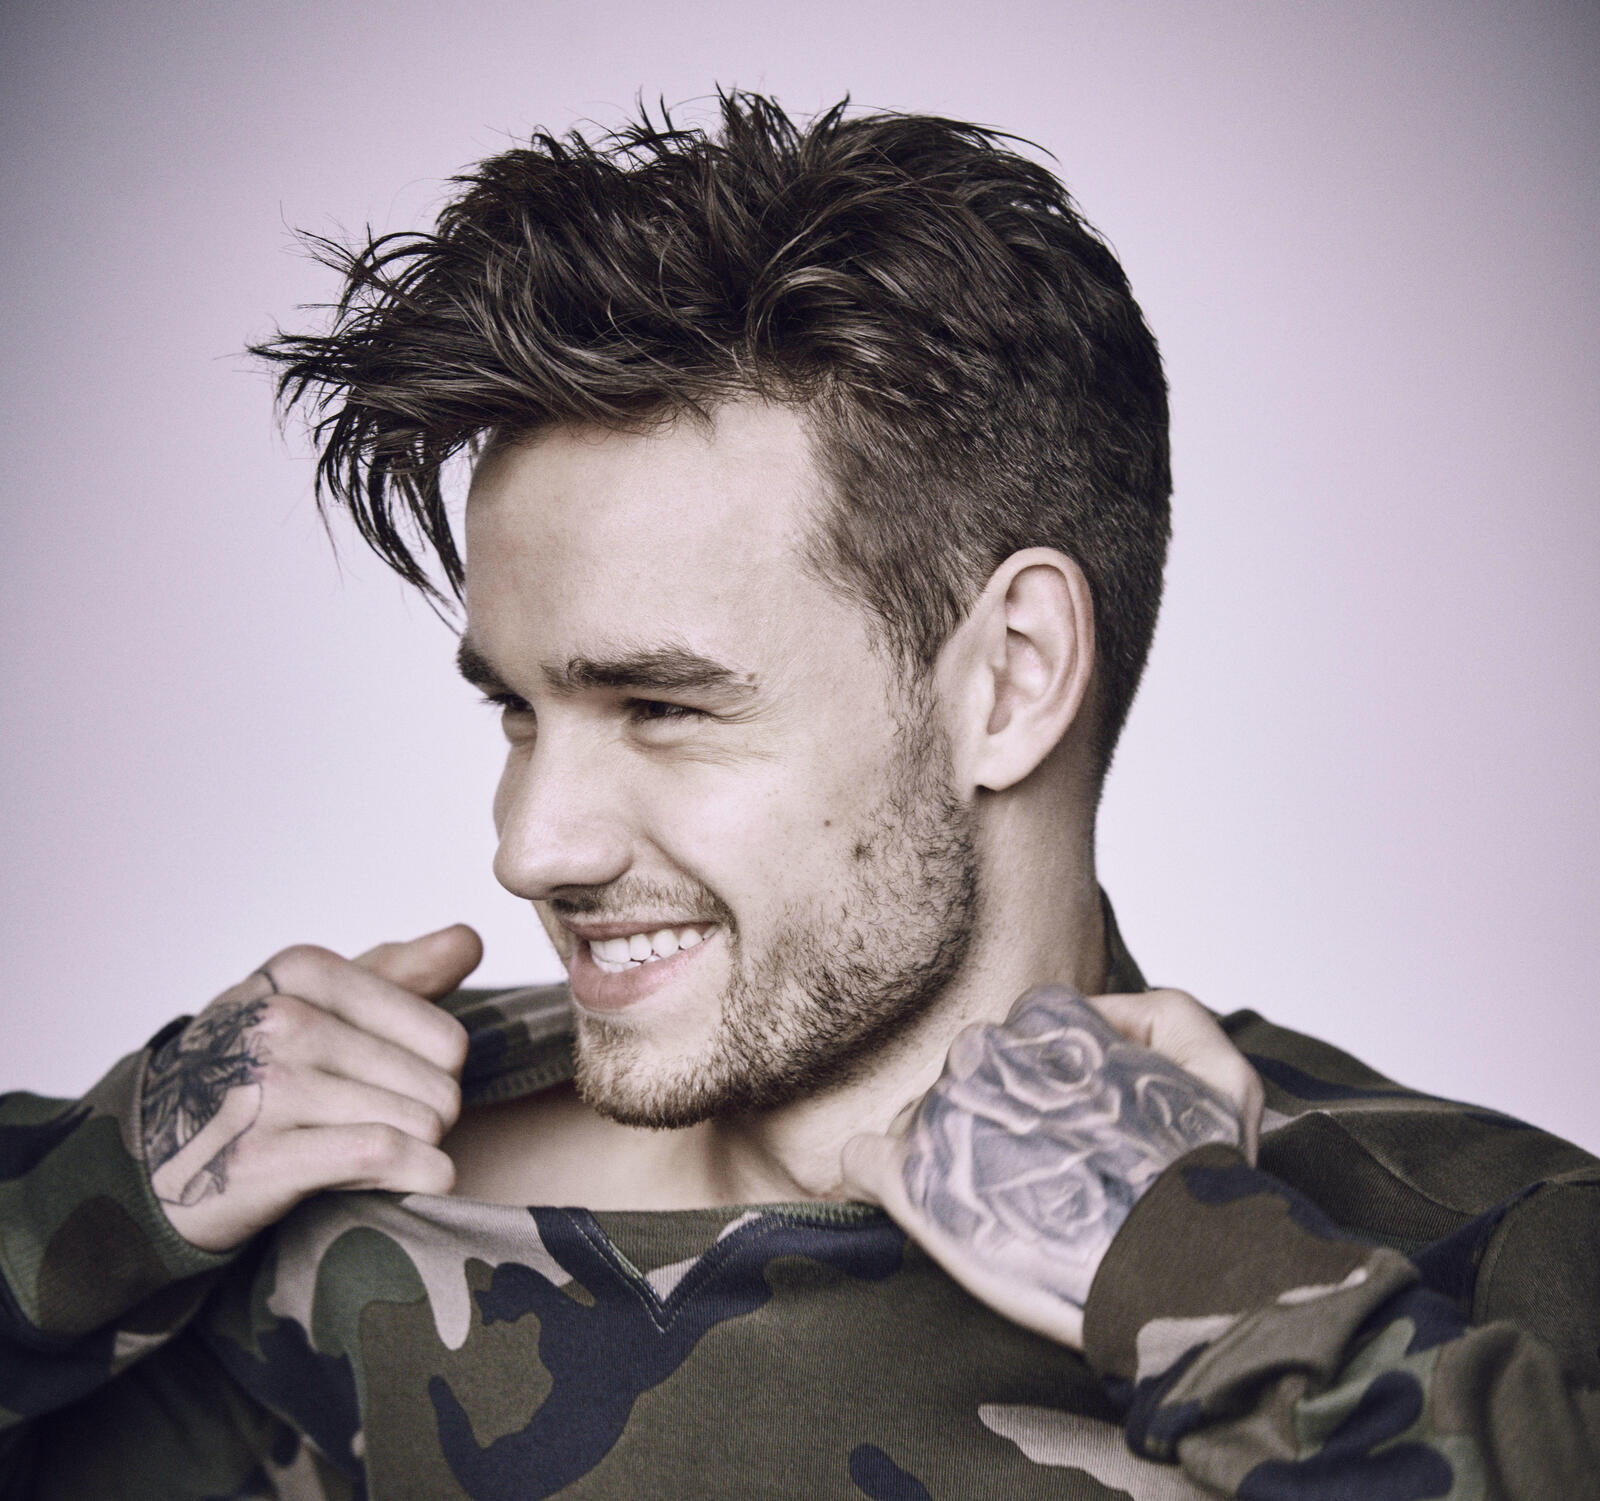 Wallpapers music Liam Payne male celebrities on the desktop